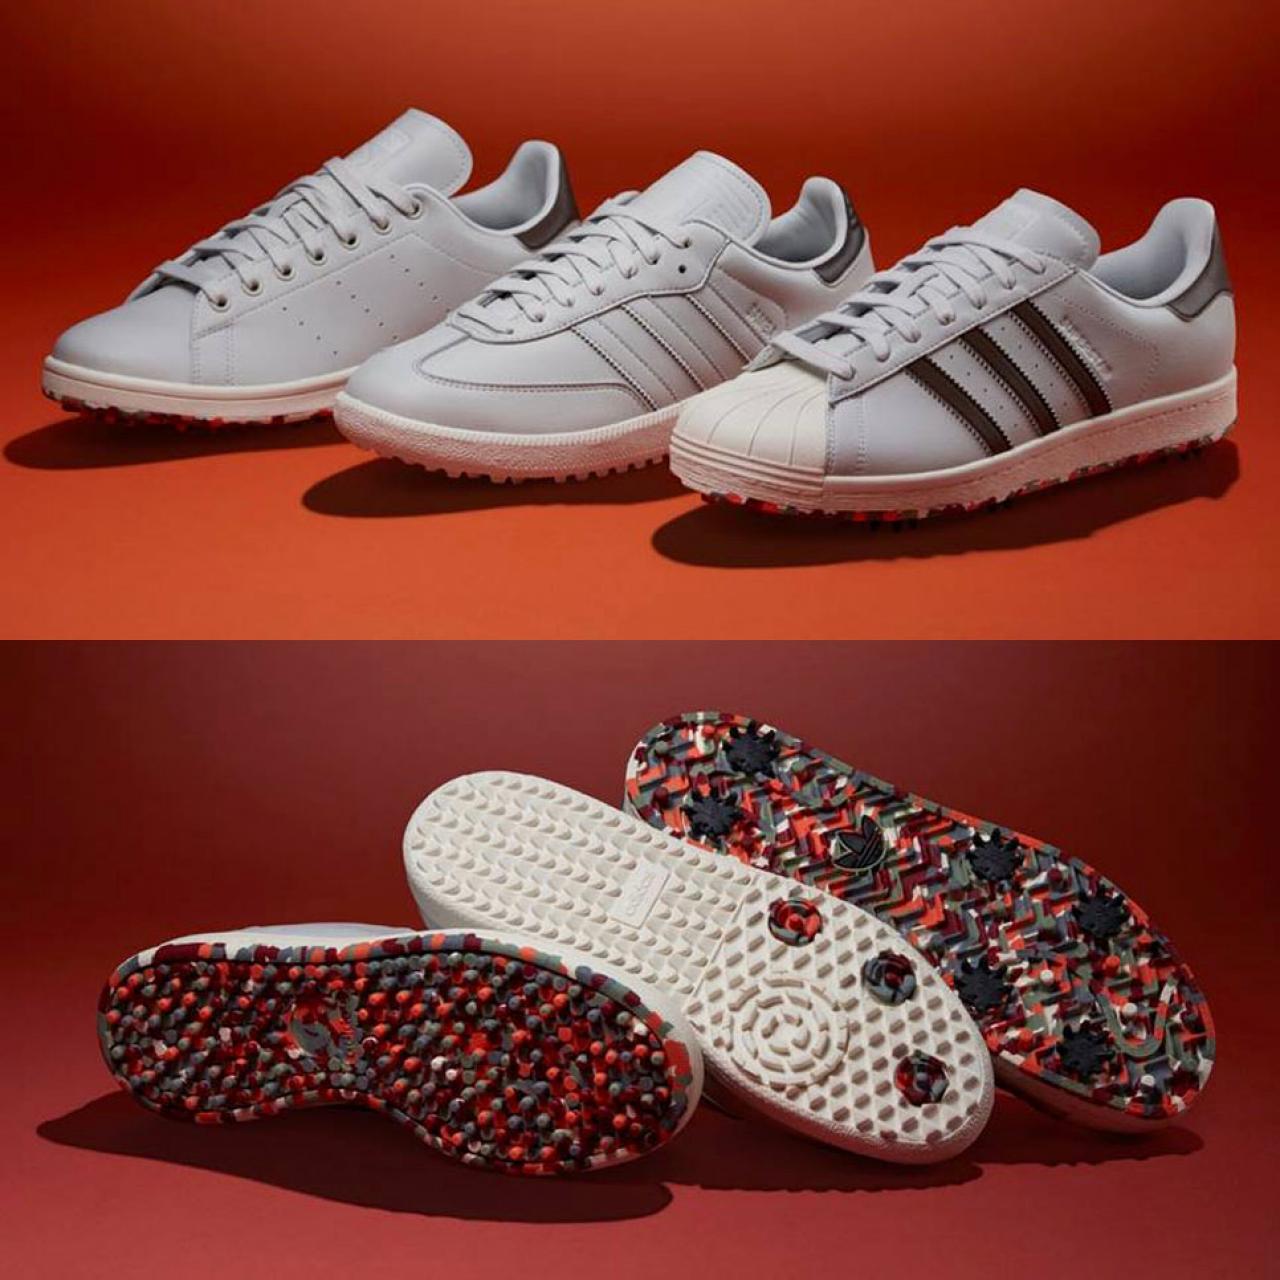 Adidas re-releases versions of the iconic Samba, Stan Smith and Superstar limited-edition capsule | Golf Equipment: Clubs, Balls, | Golf Digest